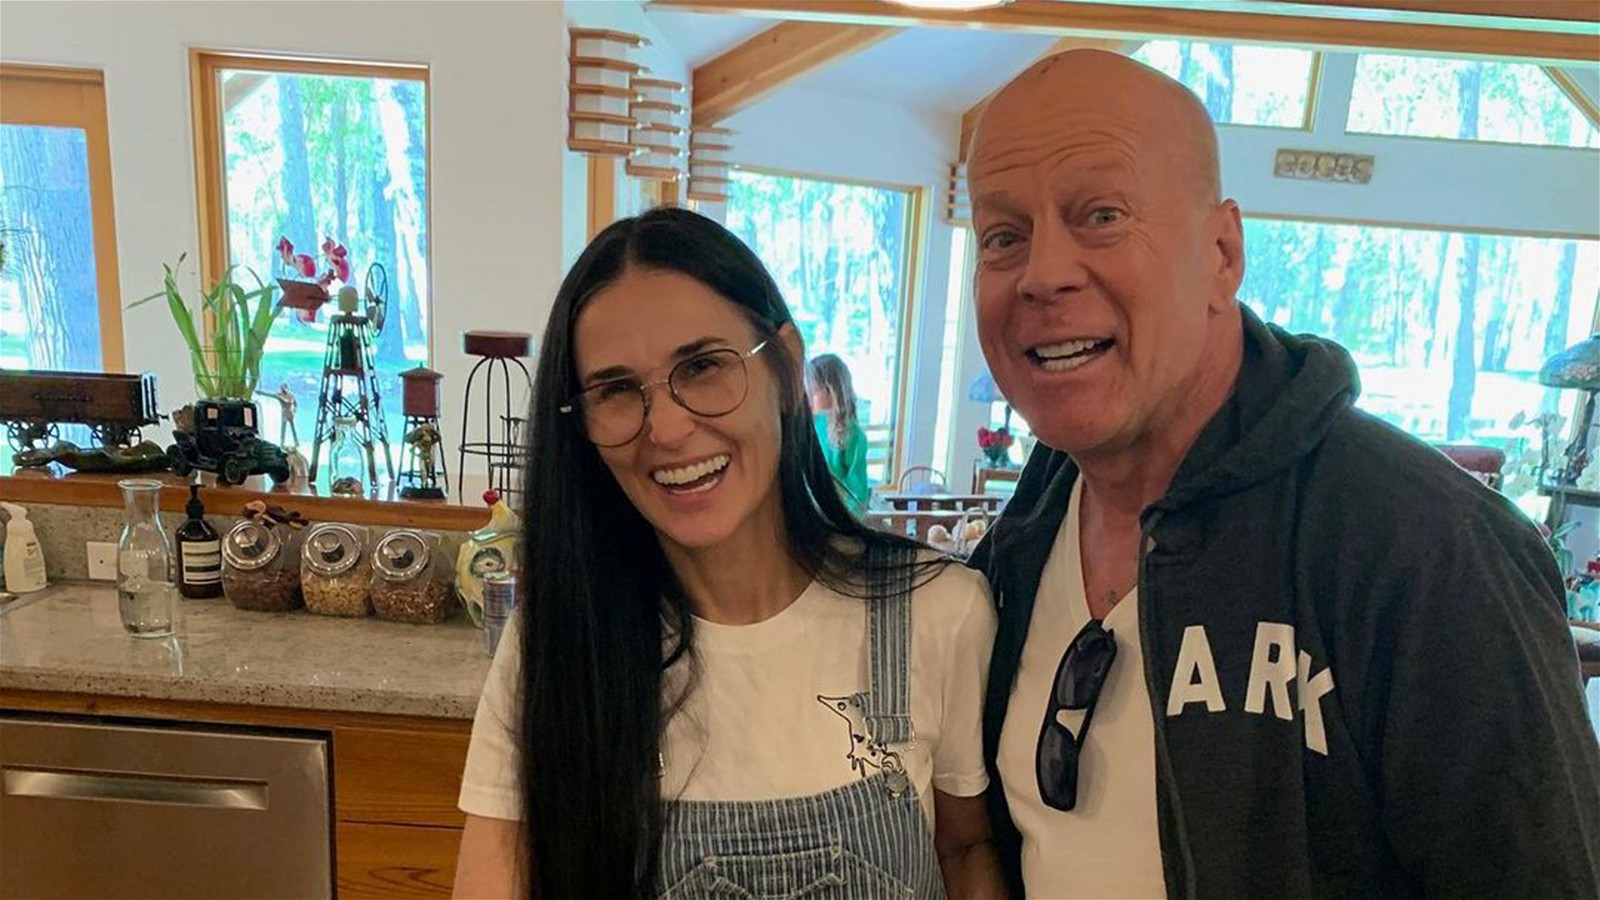 Bruce Willis And Demi Moore